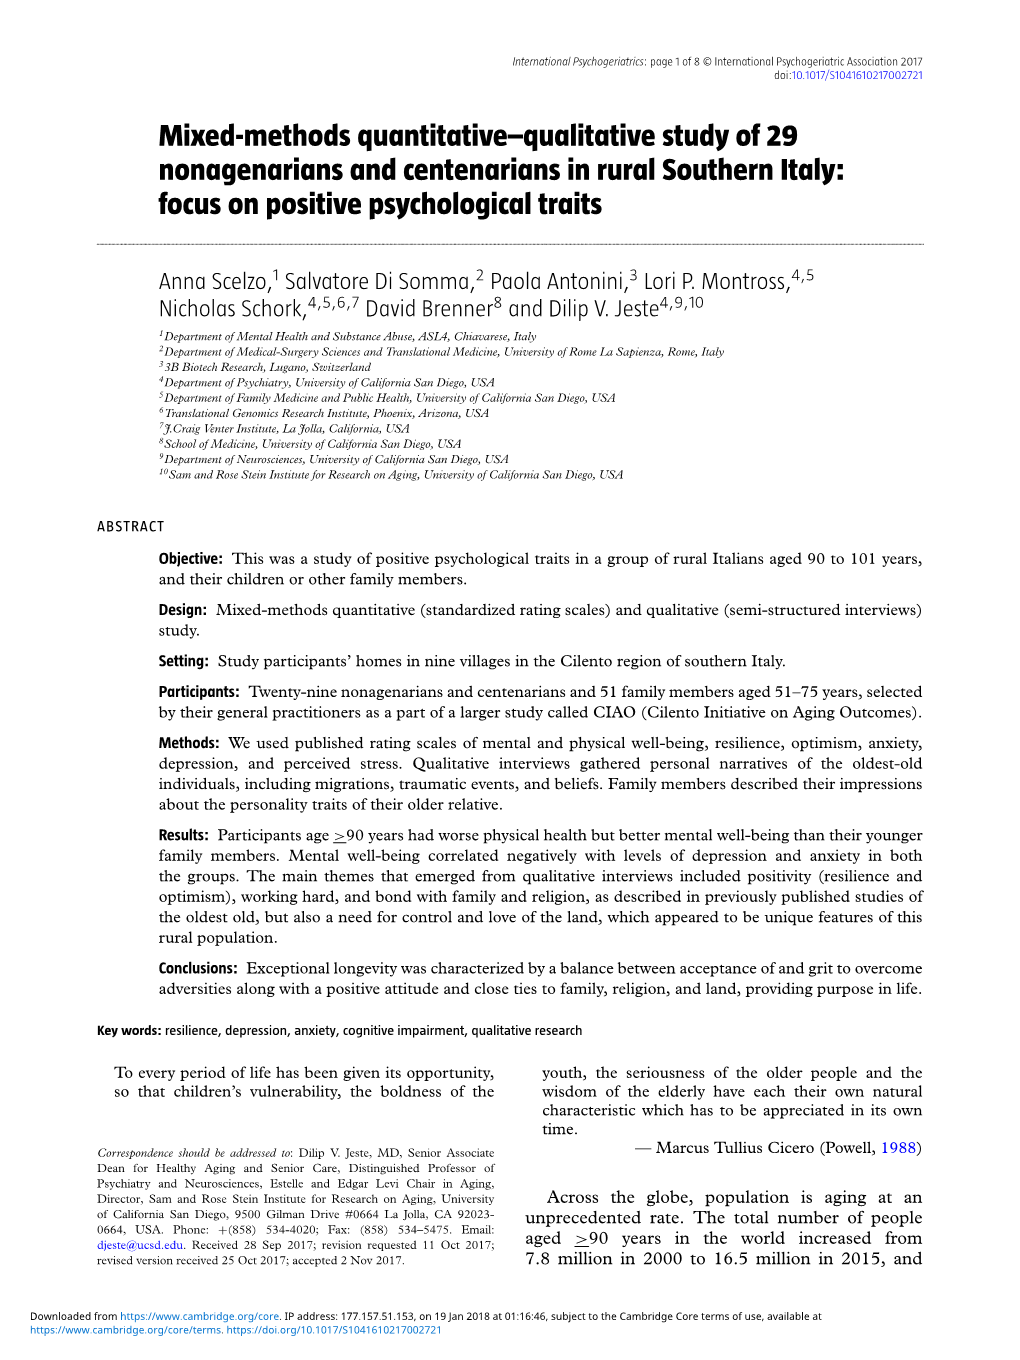 Mixed-Methods Quantitative–Qualitative Study of 29 Nonagenarians and Centenarians in Rural Southern Italy: Focus on Positive Psychological Traits